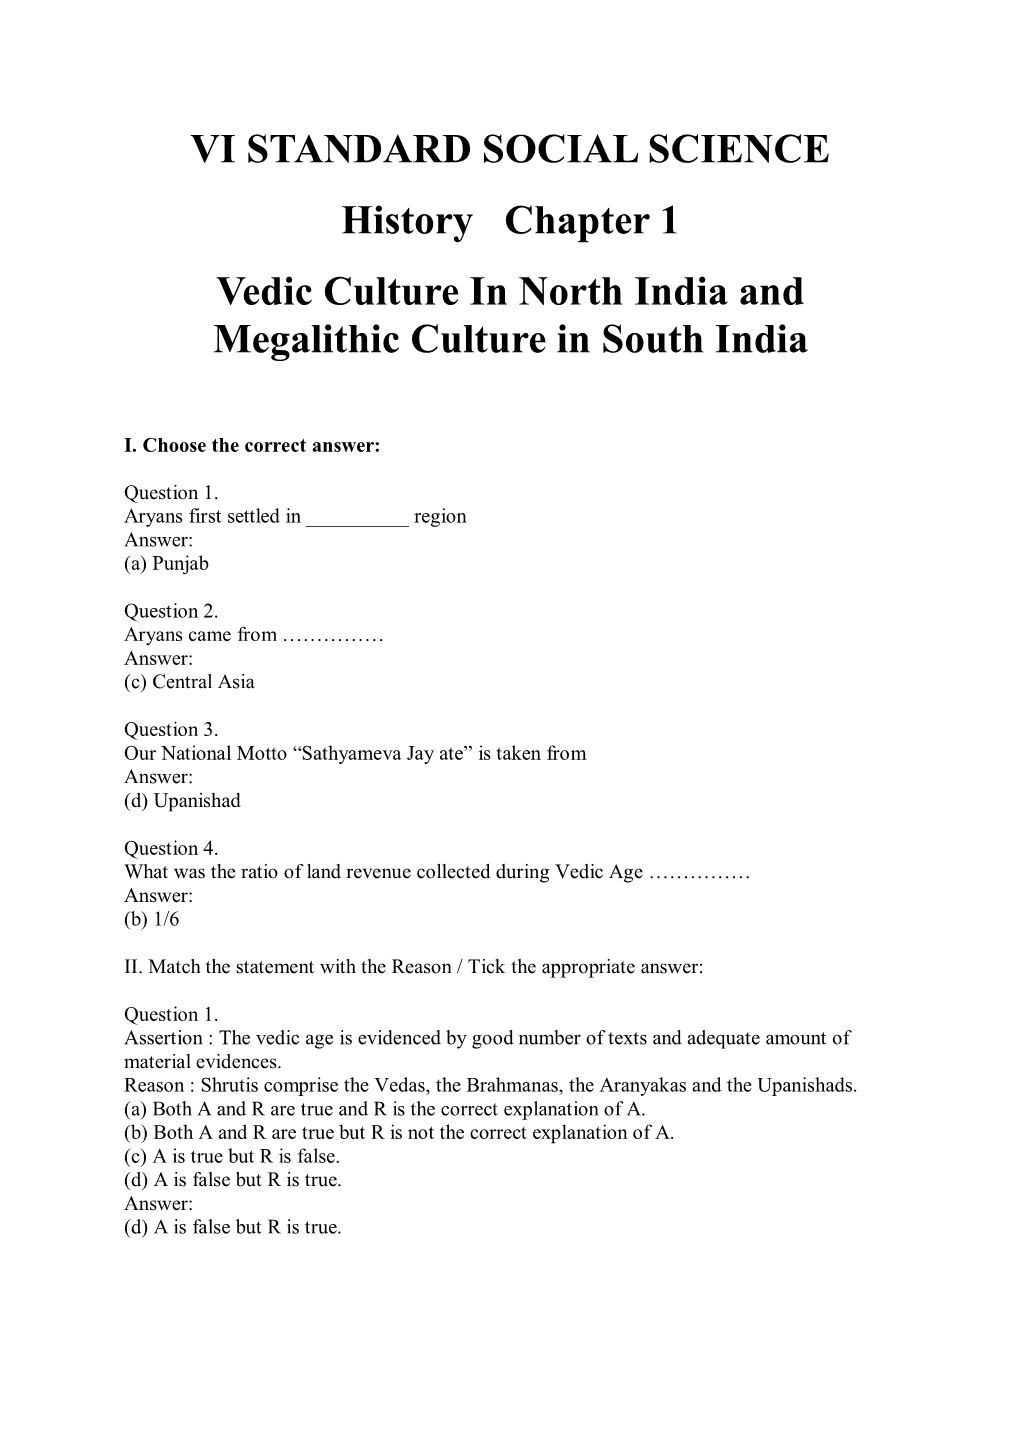 VI STANDARD SOCIAL SCIENCE History Chapter 1 Vedic Culture in North India and Megalithic Culture in South India